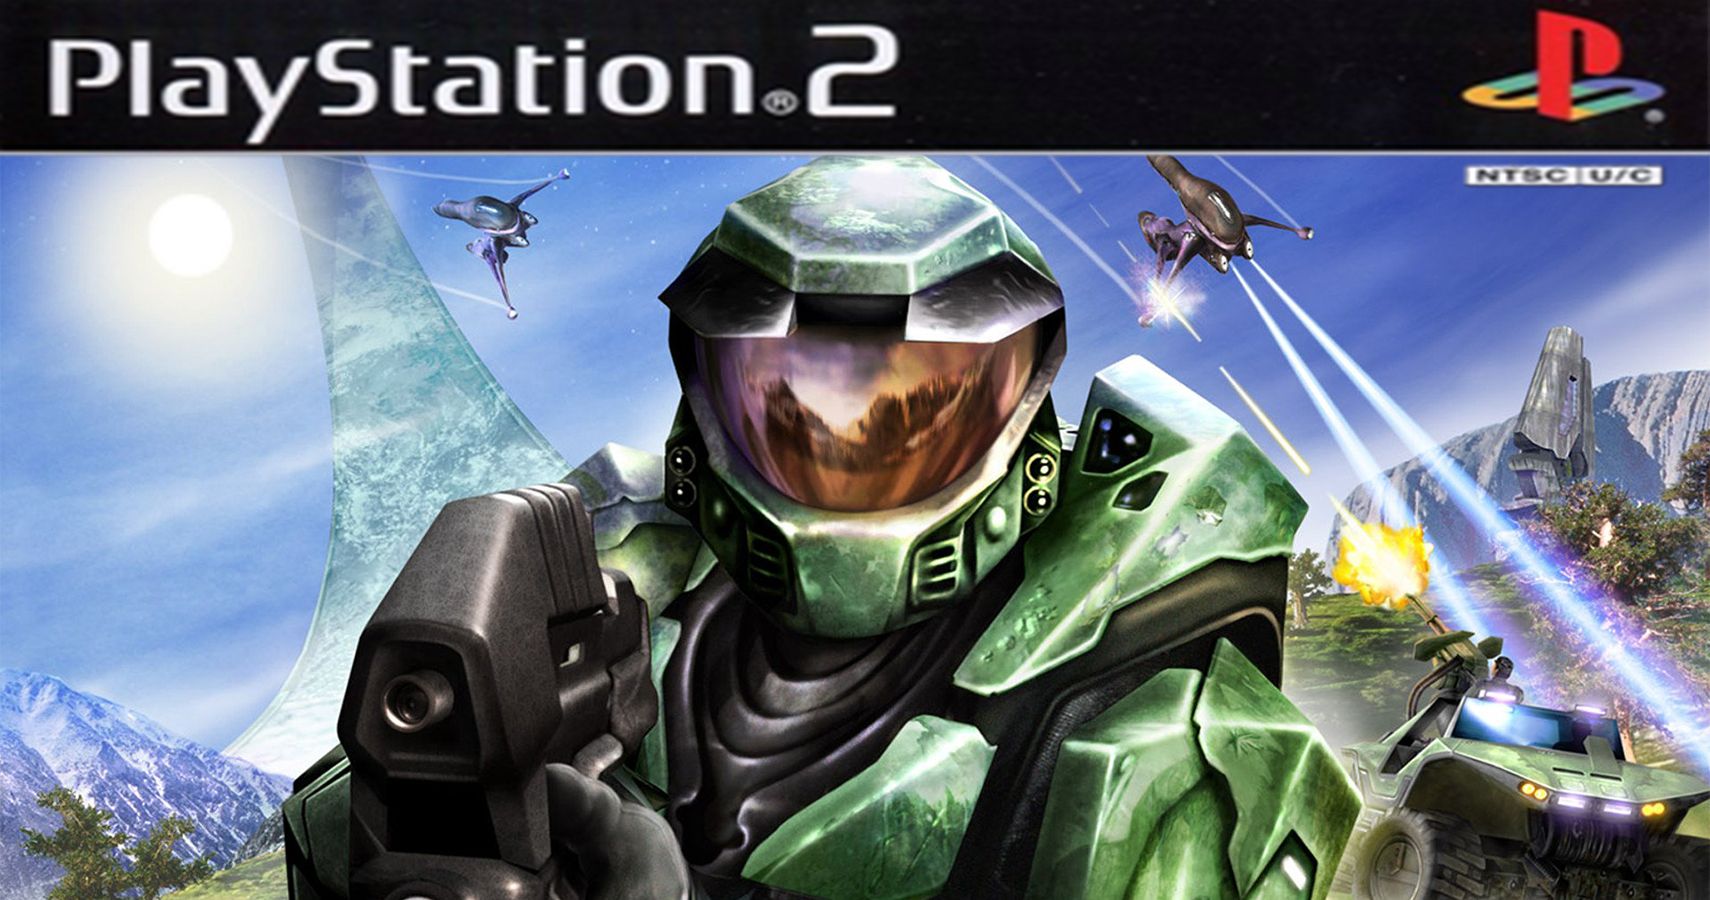 Halo On The Playstation 2? It Likely Than You